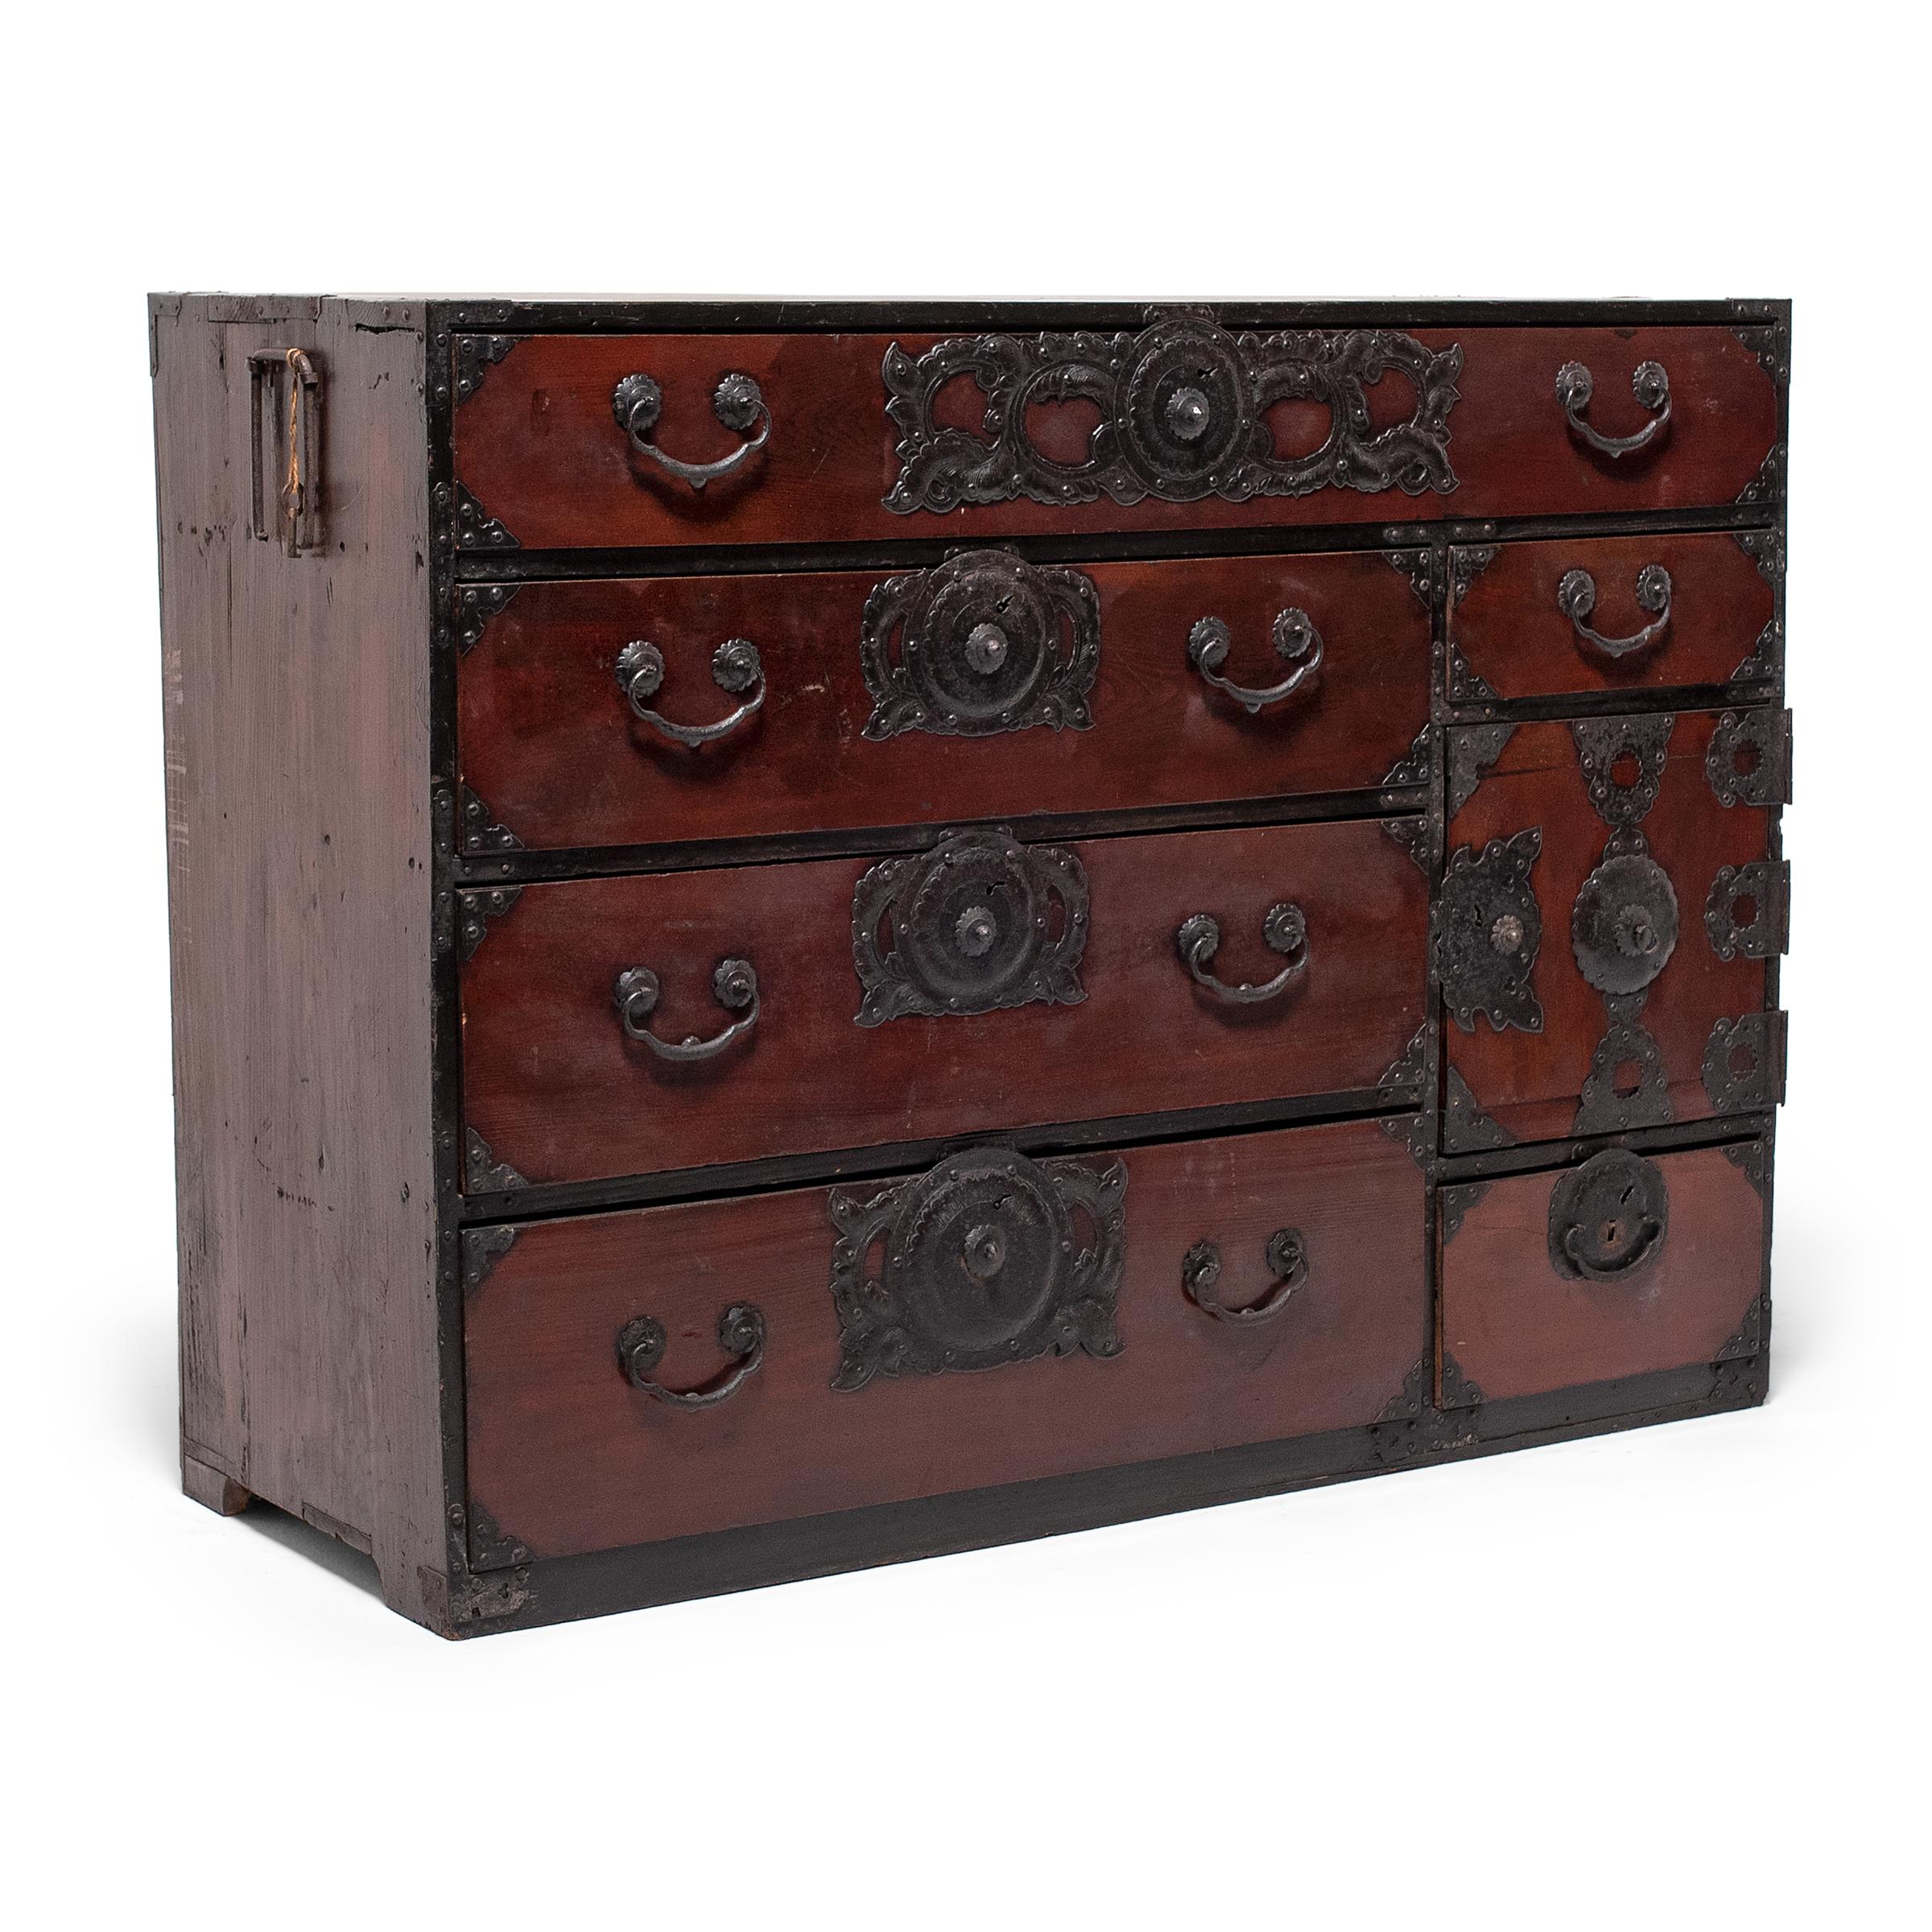 Designed to be versatile and portable, Japanese tansu chests were multipurpose storage cabinets that moved throughout the home as needed. This gorgeous example is a turn-of-the-century isho tansu (clothes chest), used for storing bedding and